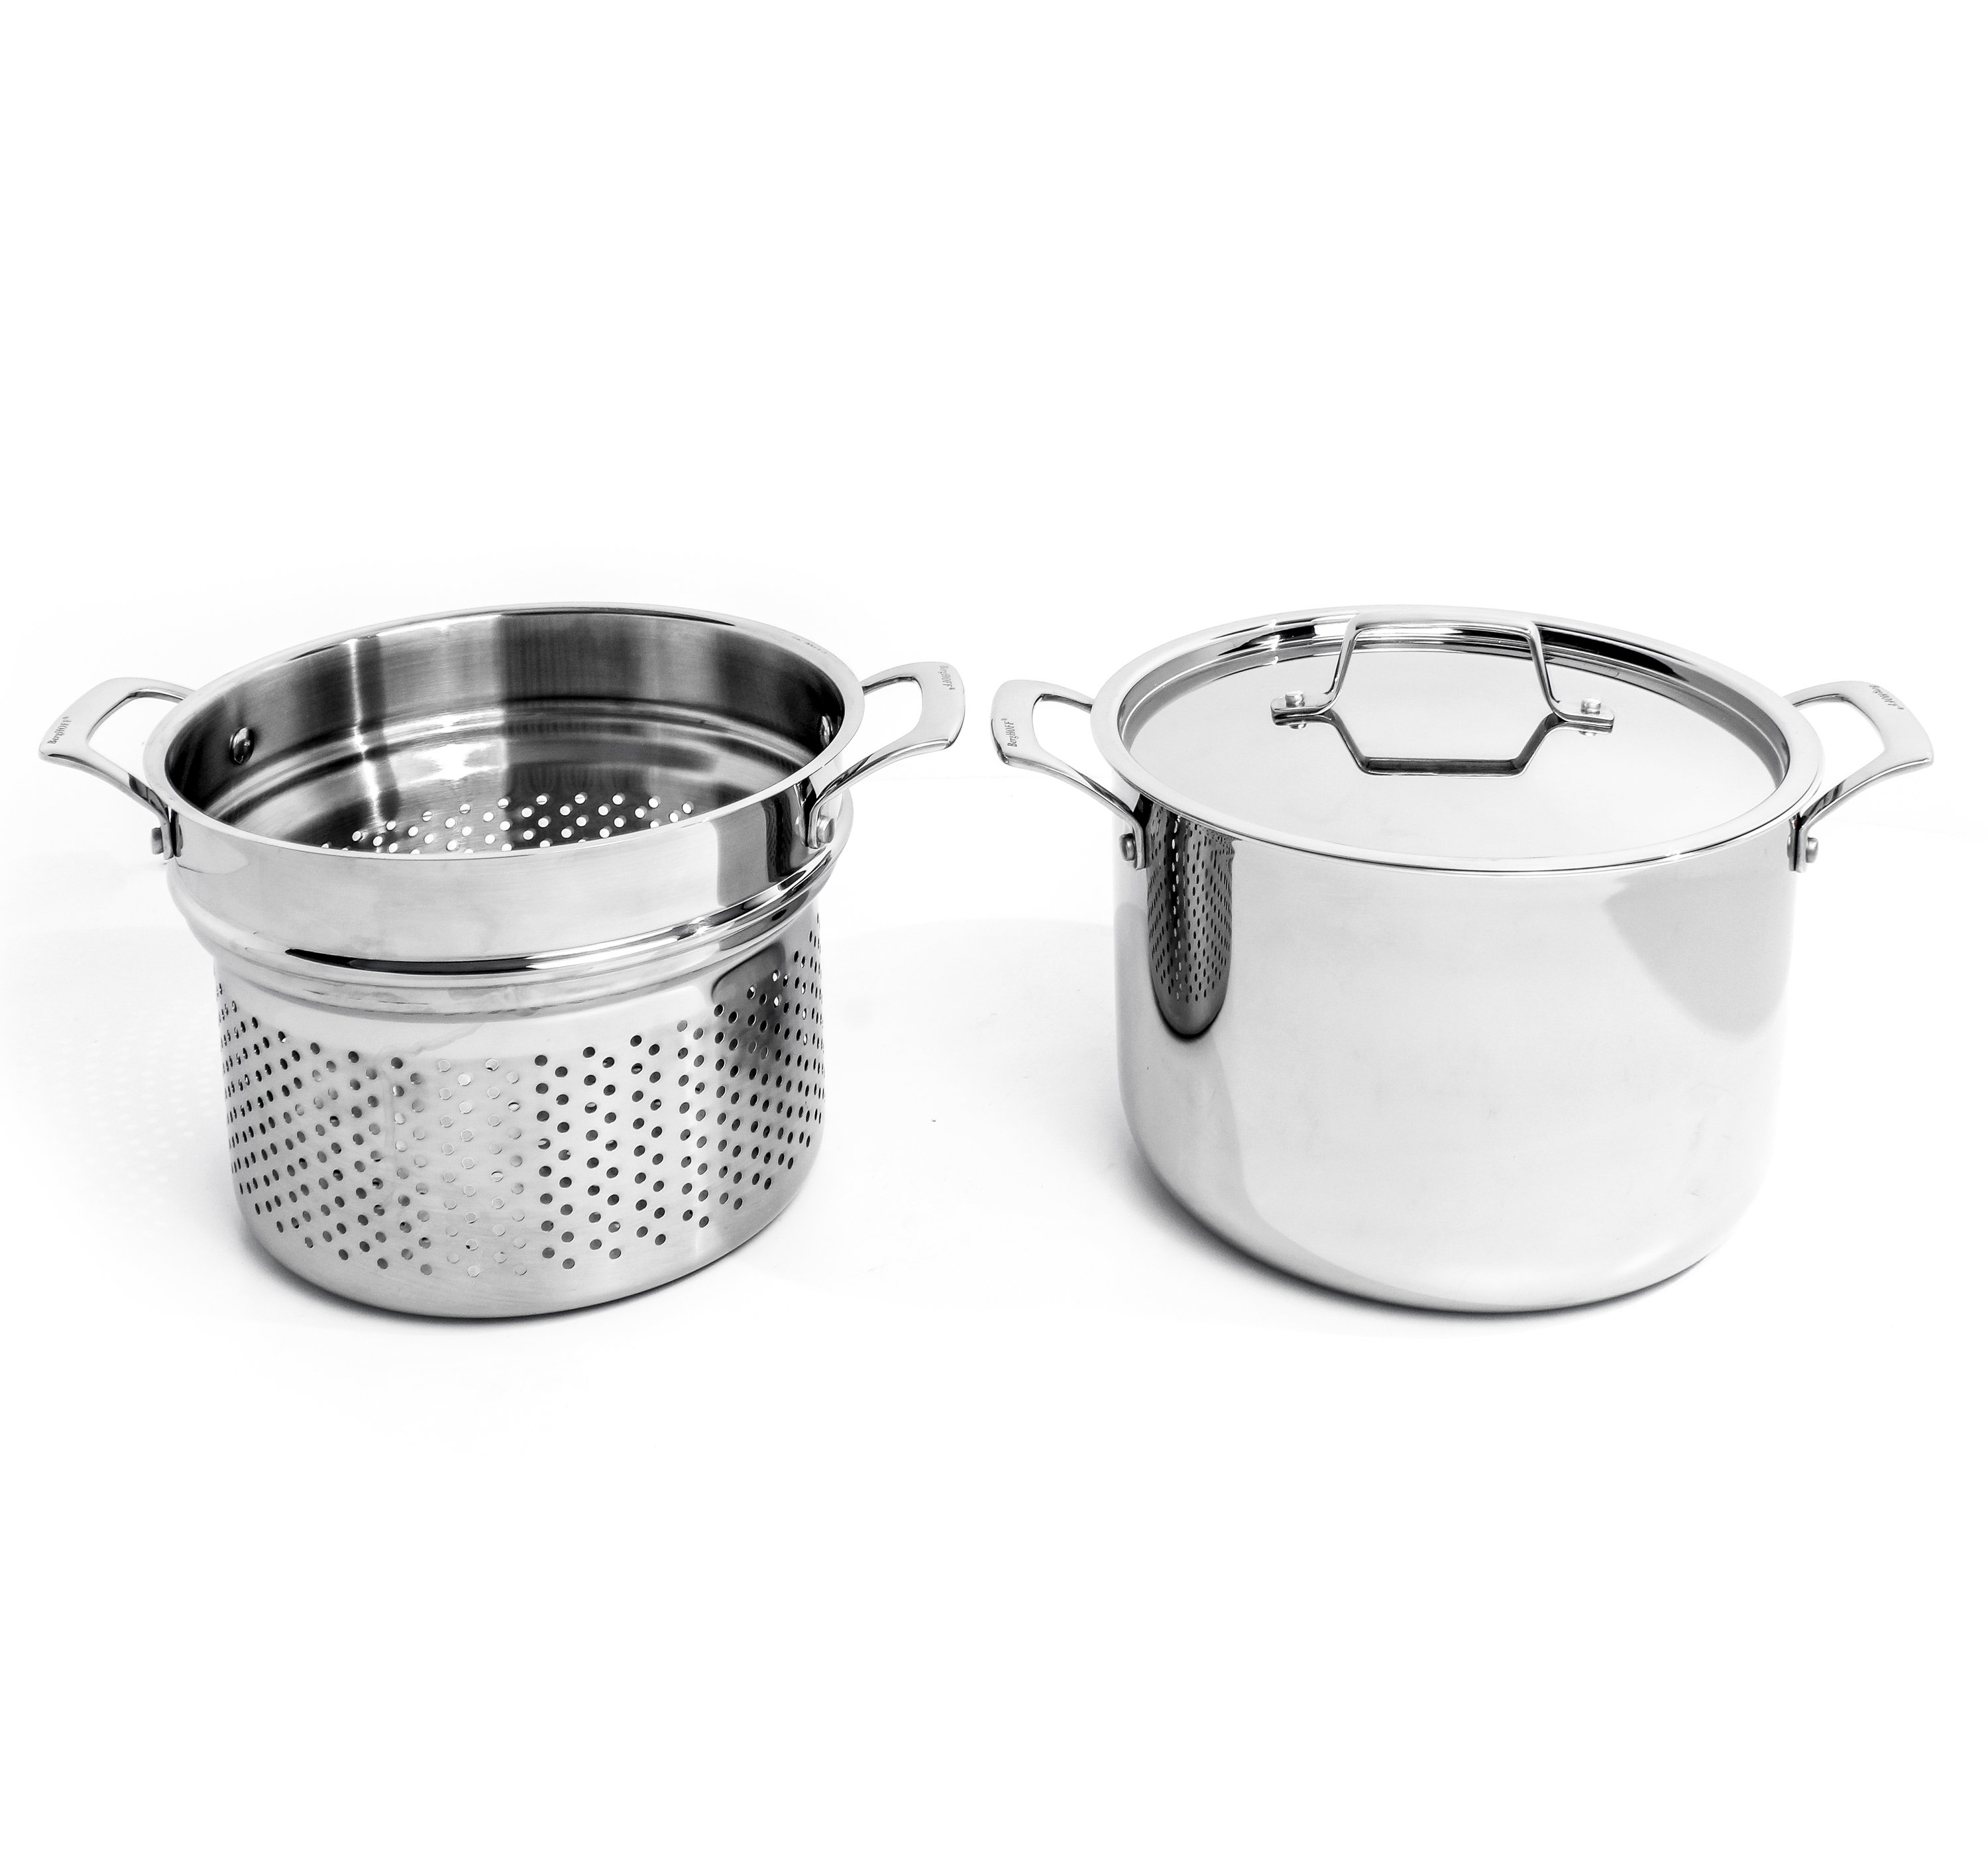 8 Quart Stainless Steel Stock Pot With Colander, Steamer, Glass Lid, Silver